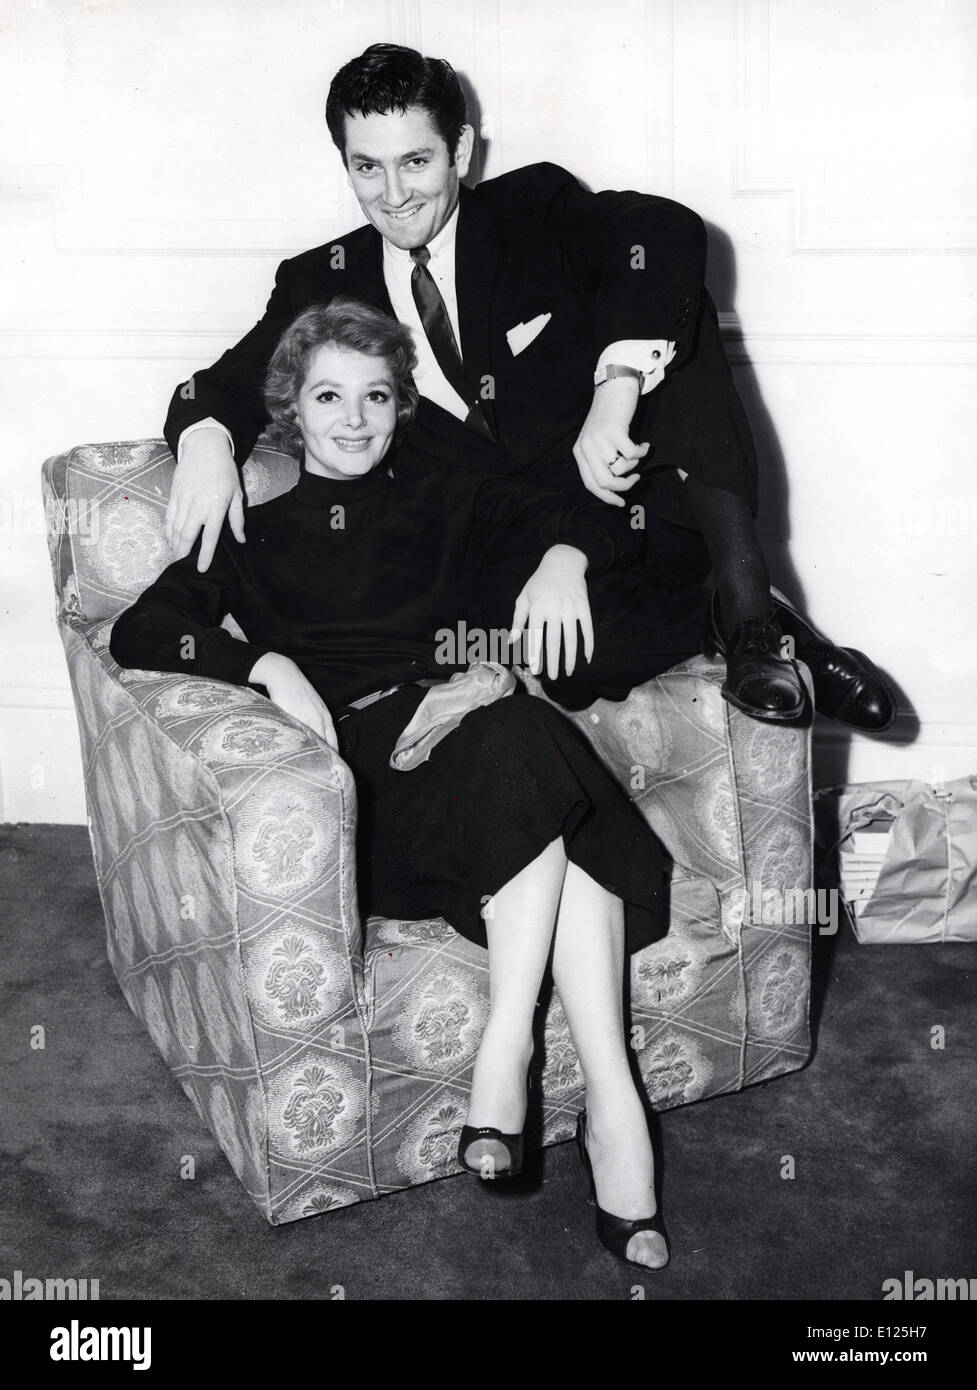 Nov 29, 2004; Los Angeles, CA, USA; File Photo: 1955 with DORIS KENYON. Actor JOHN D. BARRYMORE known for his drinking, drug taking and abusive behavior and the absent father of movie star Drew Barrymore, died today in Los Angeles. He was 72. JOHN D. BARRYMORE was born in Beverly Hills on June 4, 1932. His mother was actress Dolores Costello. He started his career while a teenager, appearing professionally first as John Barrymore Jr. and then as John Drew Barrymore Stock Photo